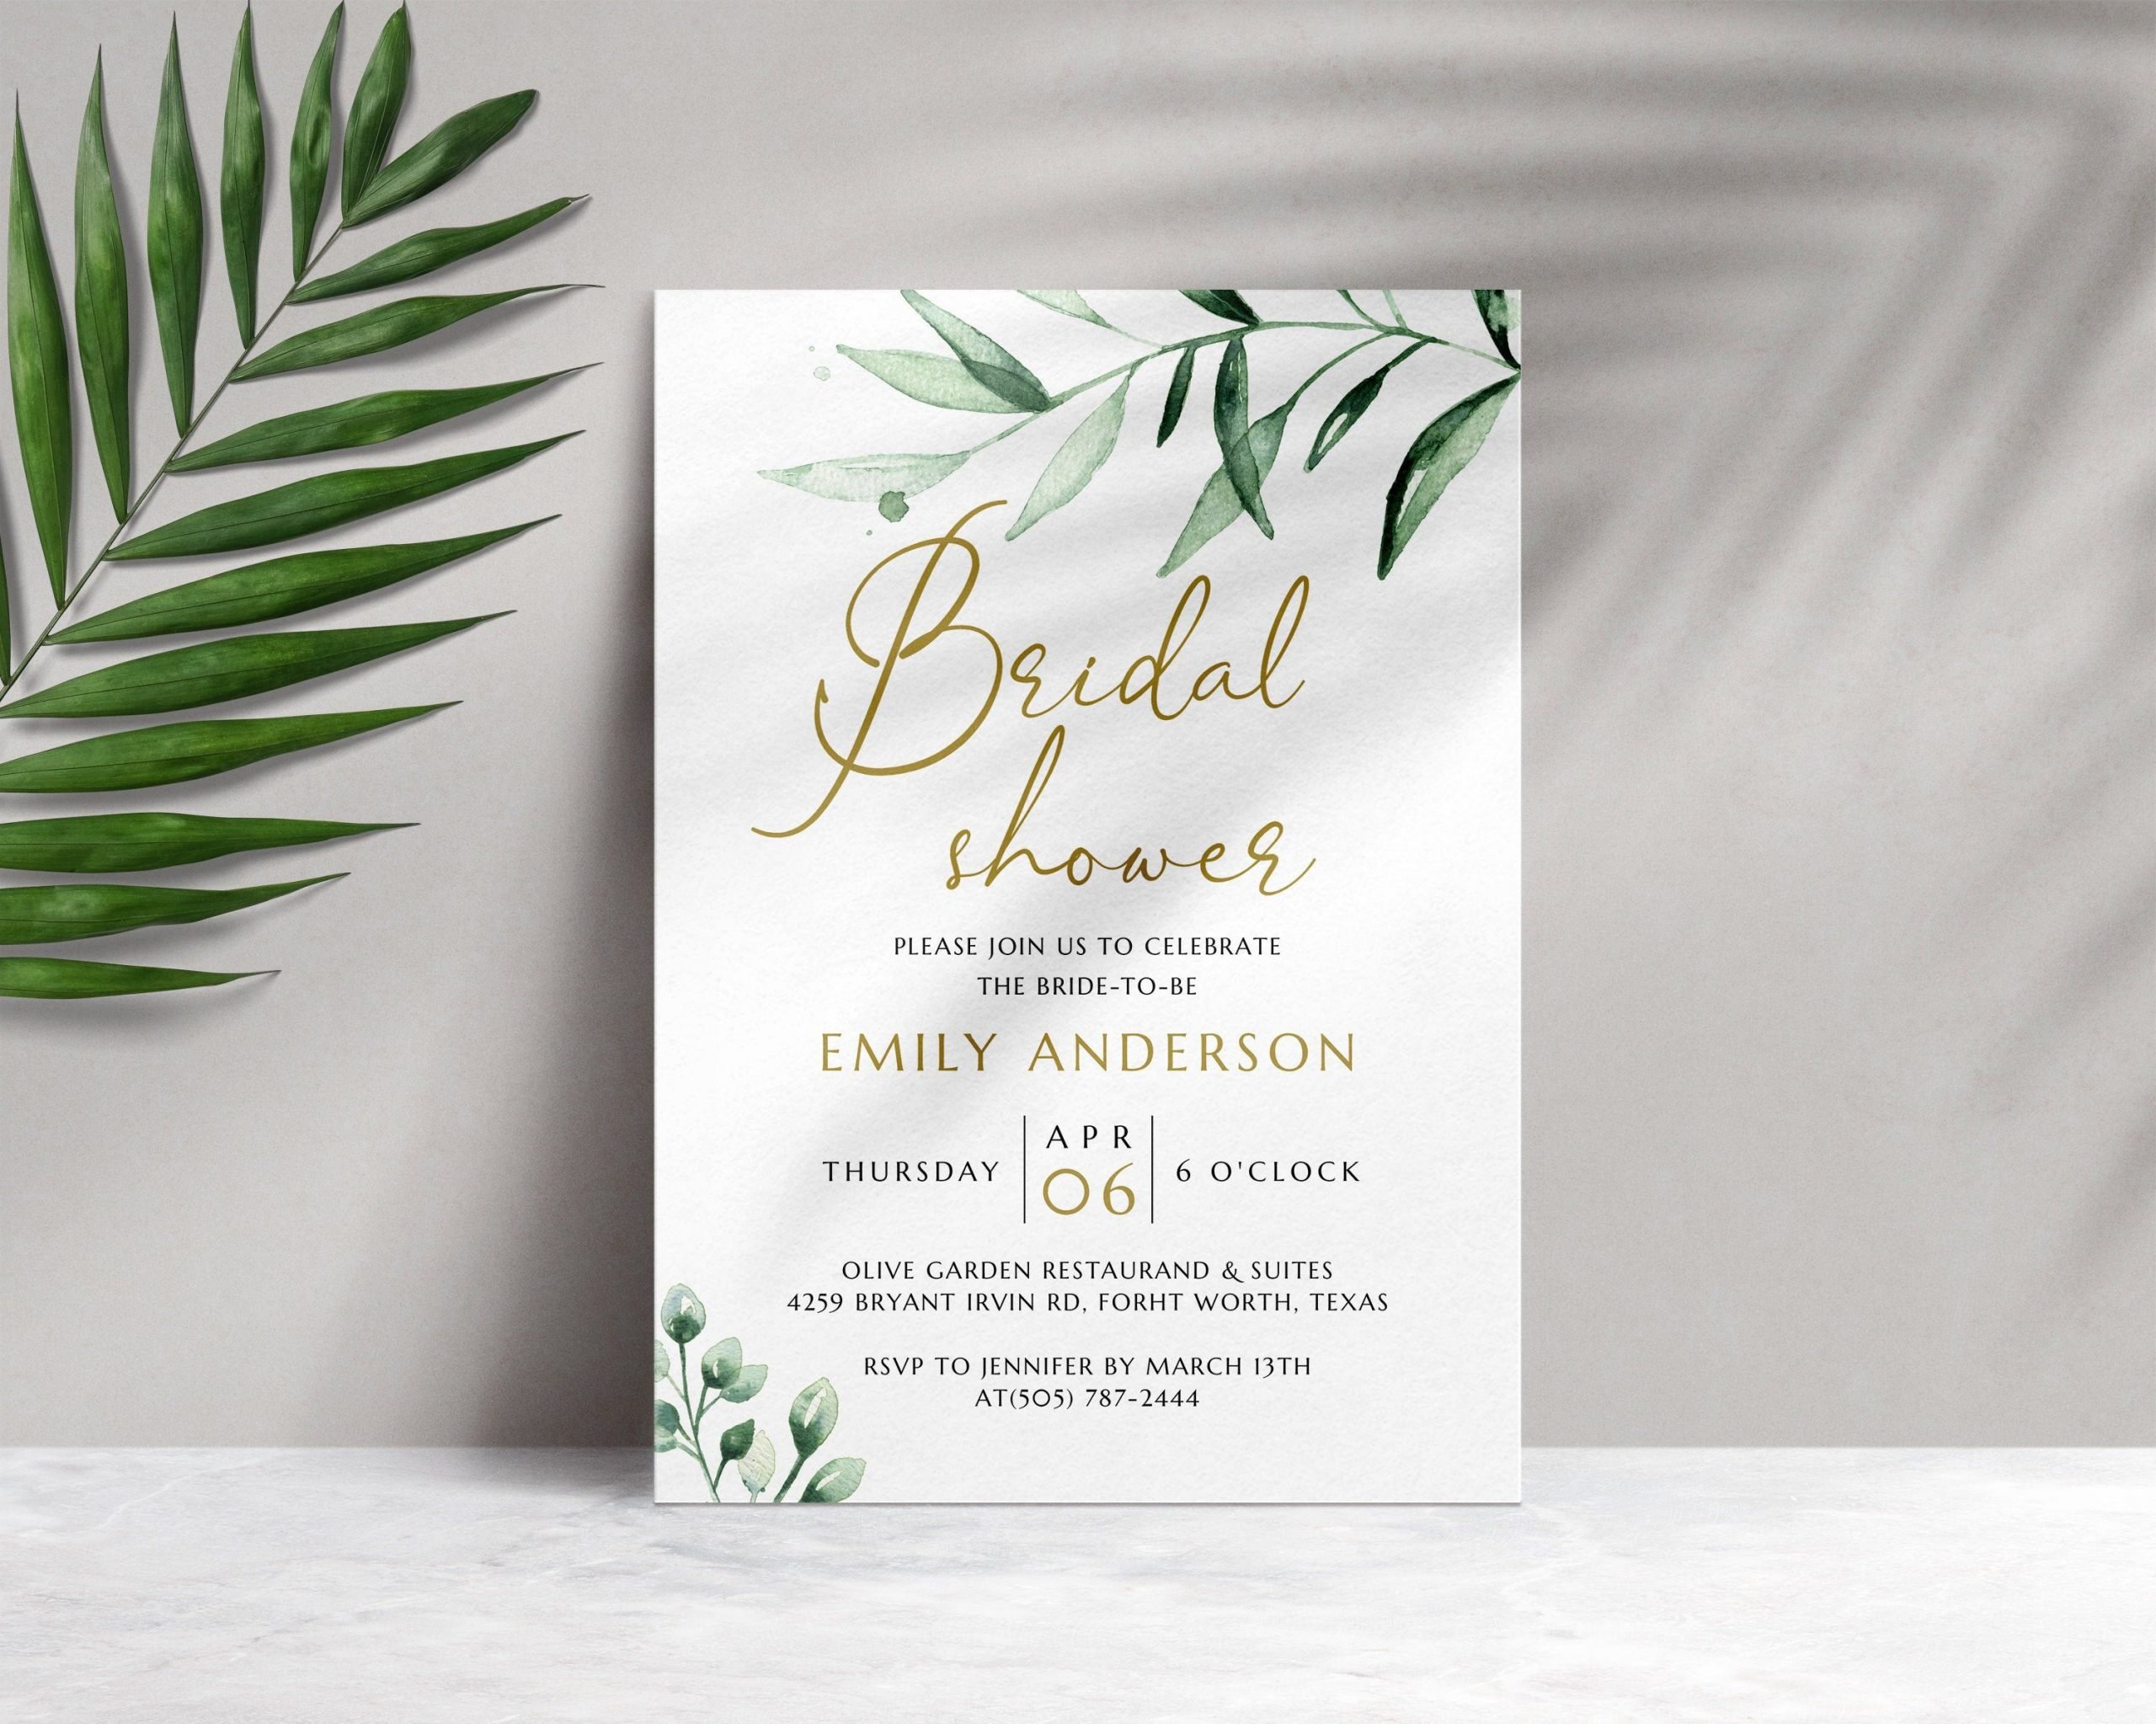 How Early To Send Wedding Shower Invitations